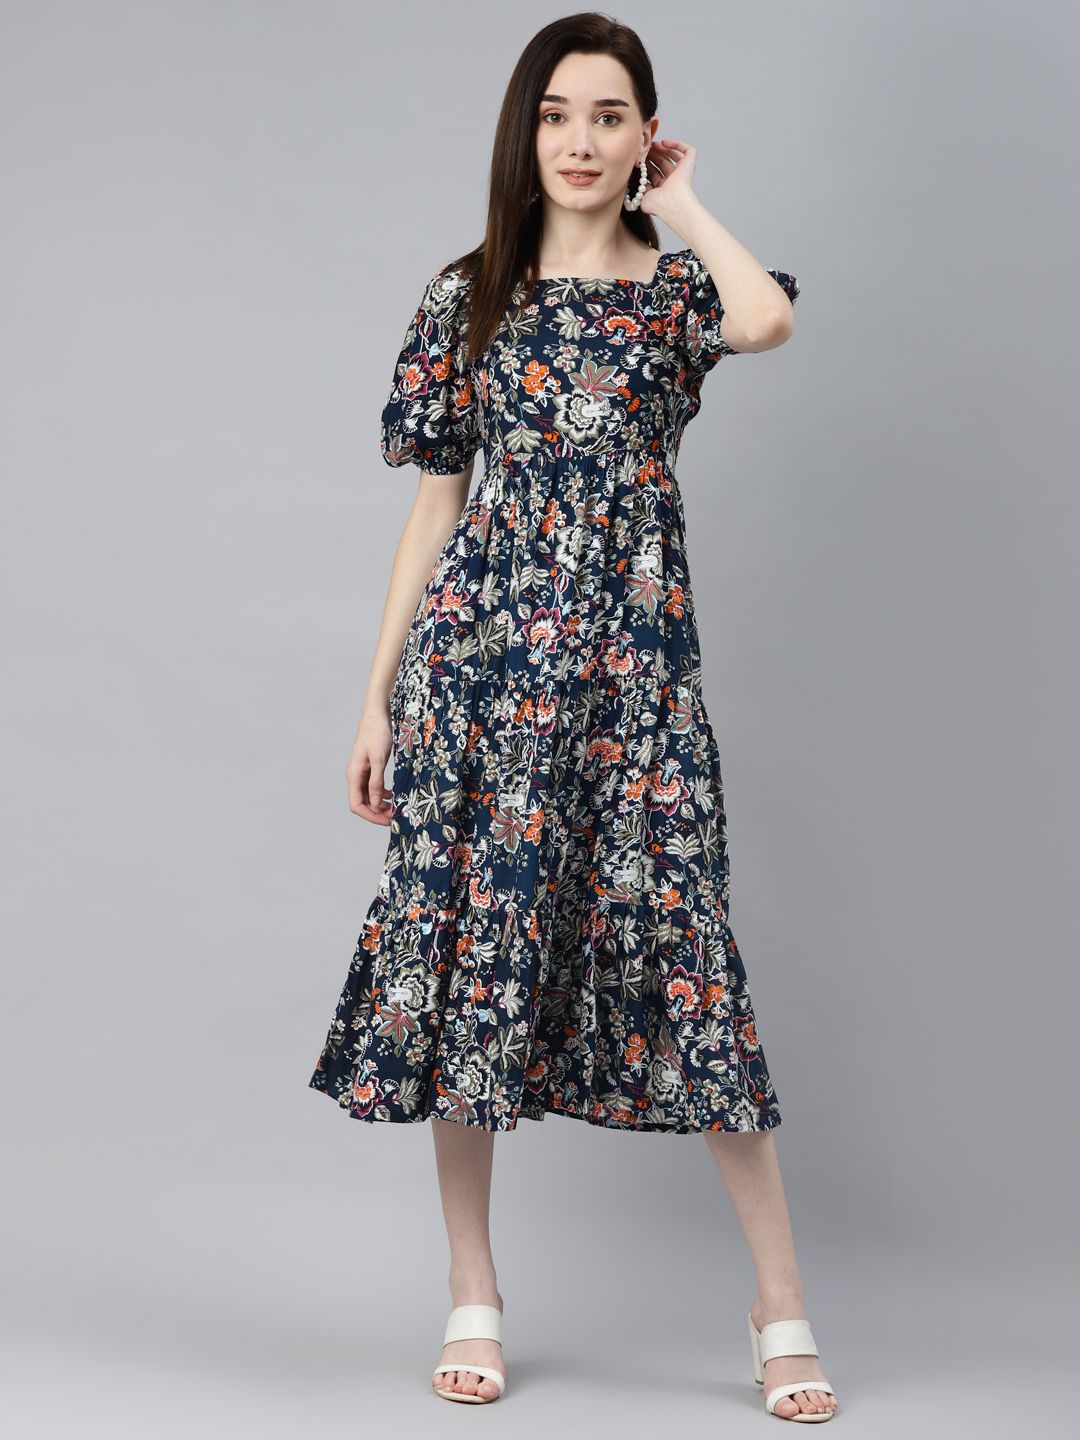 Indibelle Navy Blue Floral Puff Sleeves Midi Dress Price in India